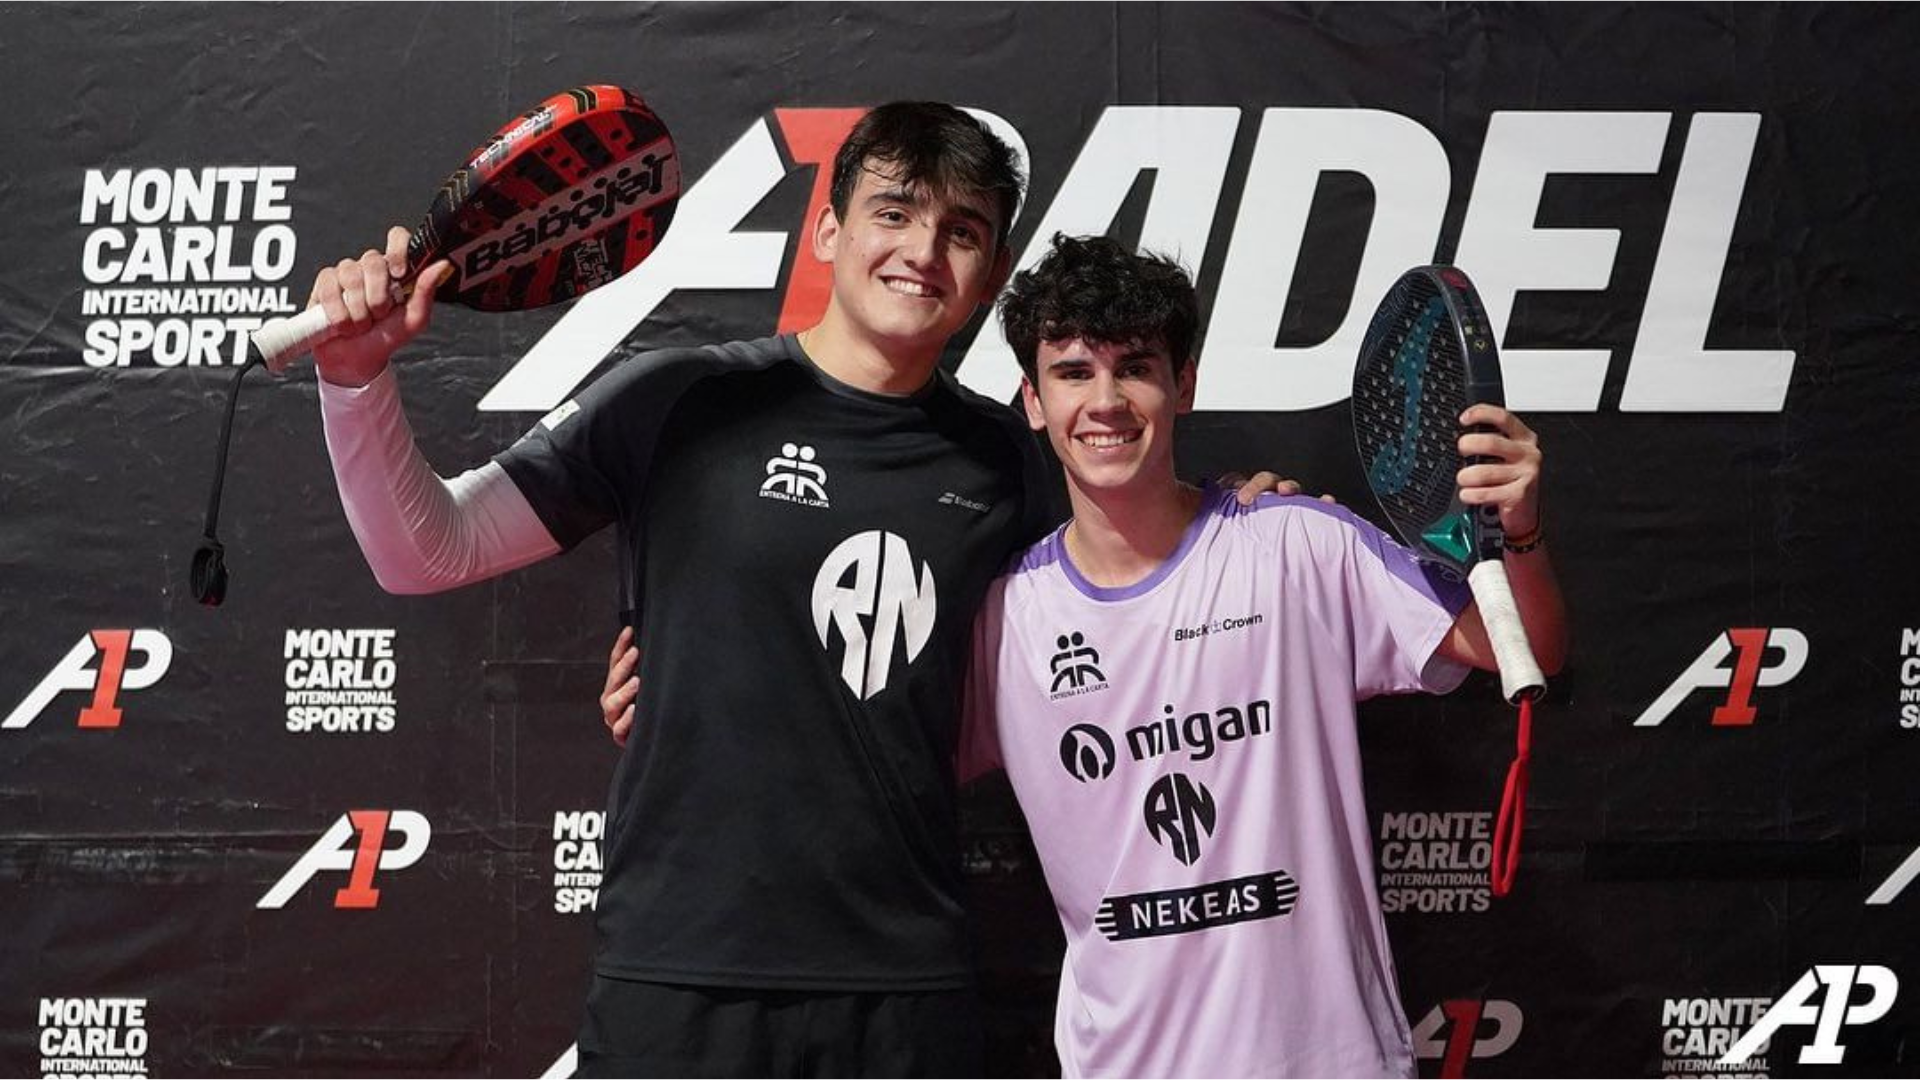 A1 Padel France Grand Master – Tito and Tolito beaten by a qualified pair, already surprises!